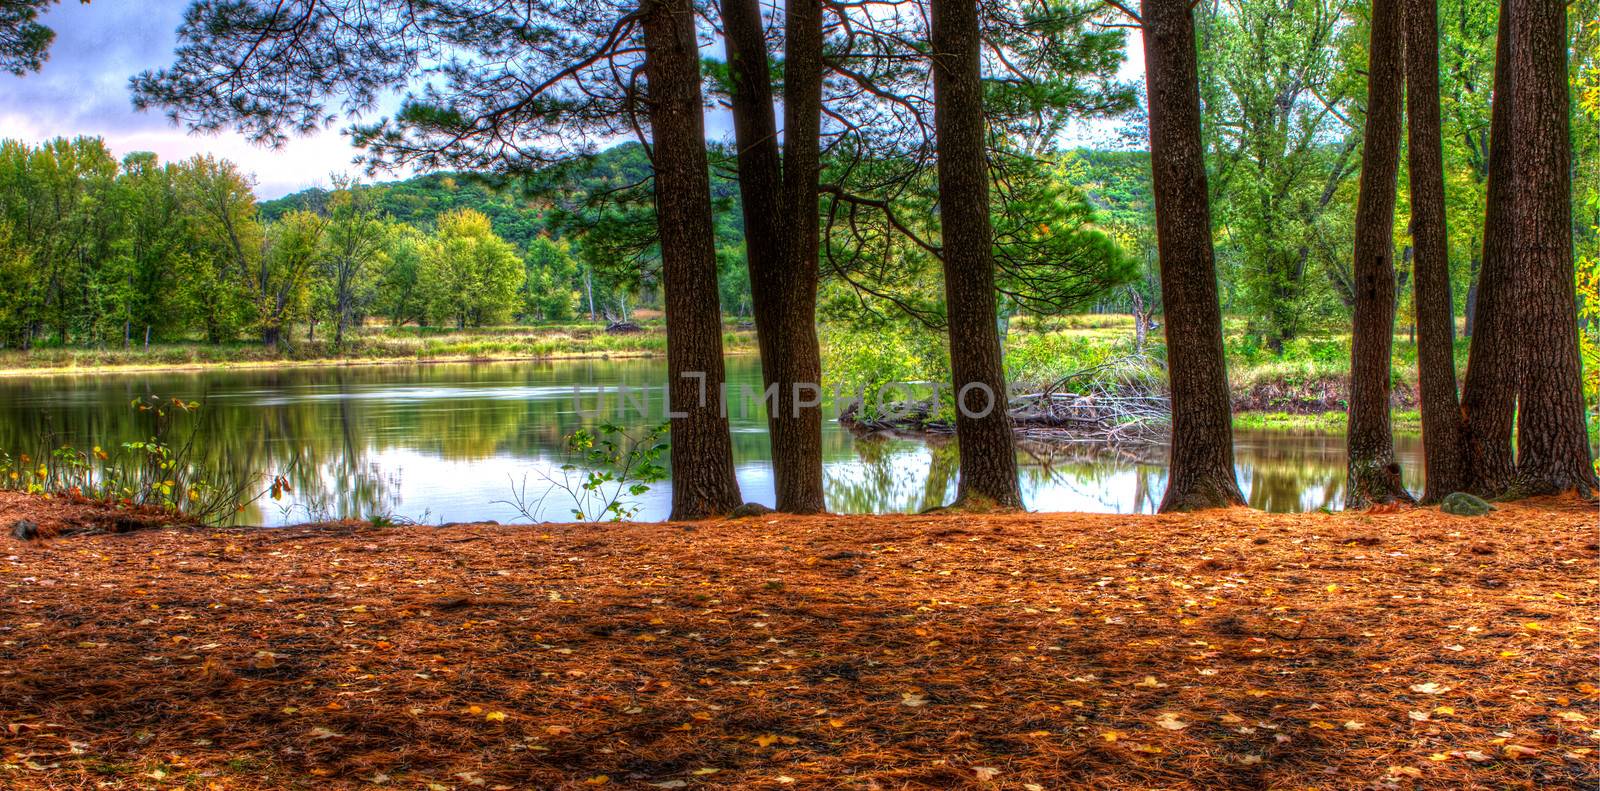 HDR landscape of a forest and pond